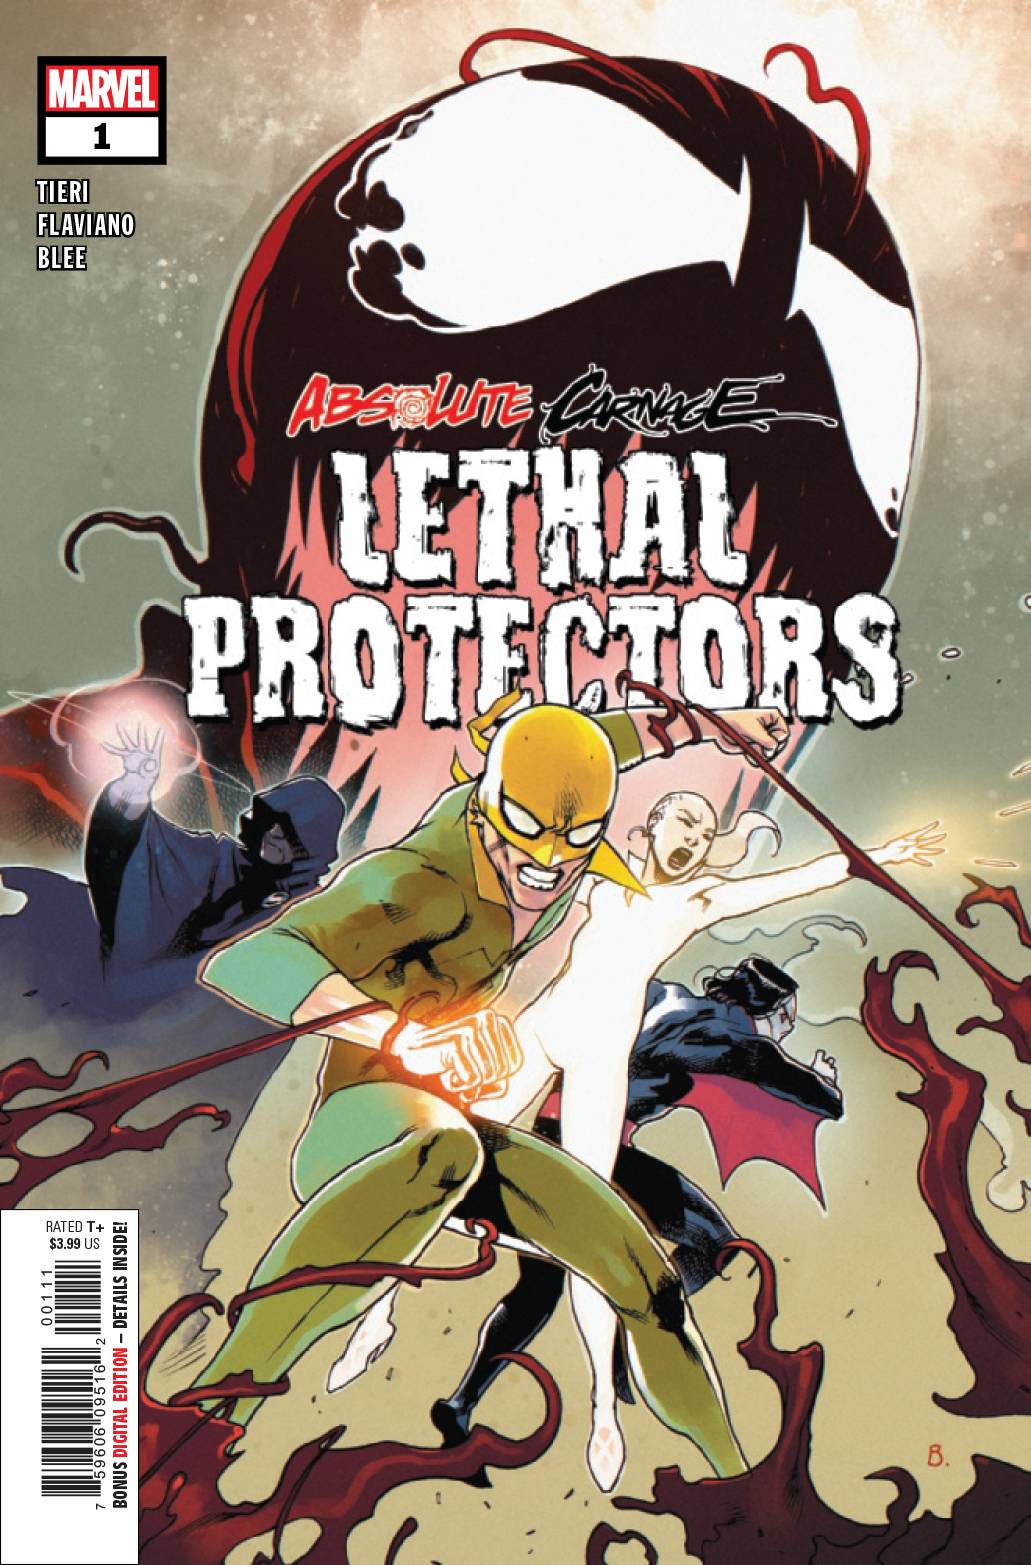 ABSOLUTE CARNAGE LETHAL PROTECTORS #1 (OF 3) 08/28/19